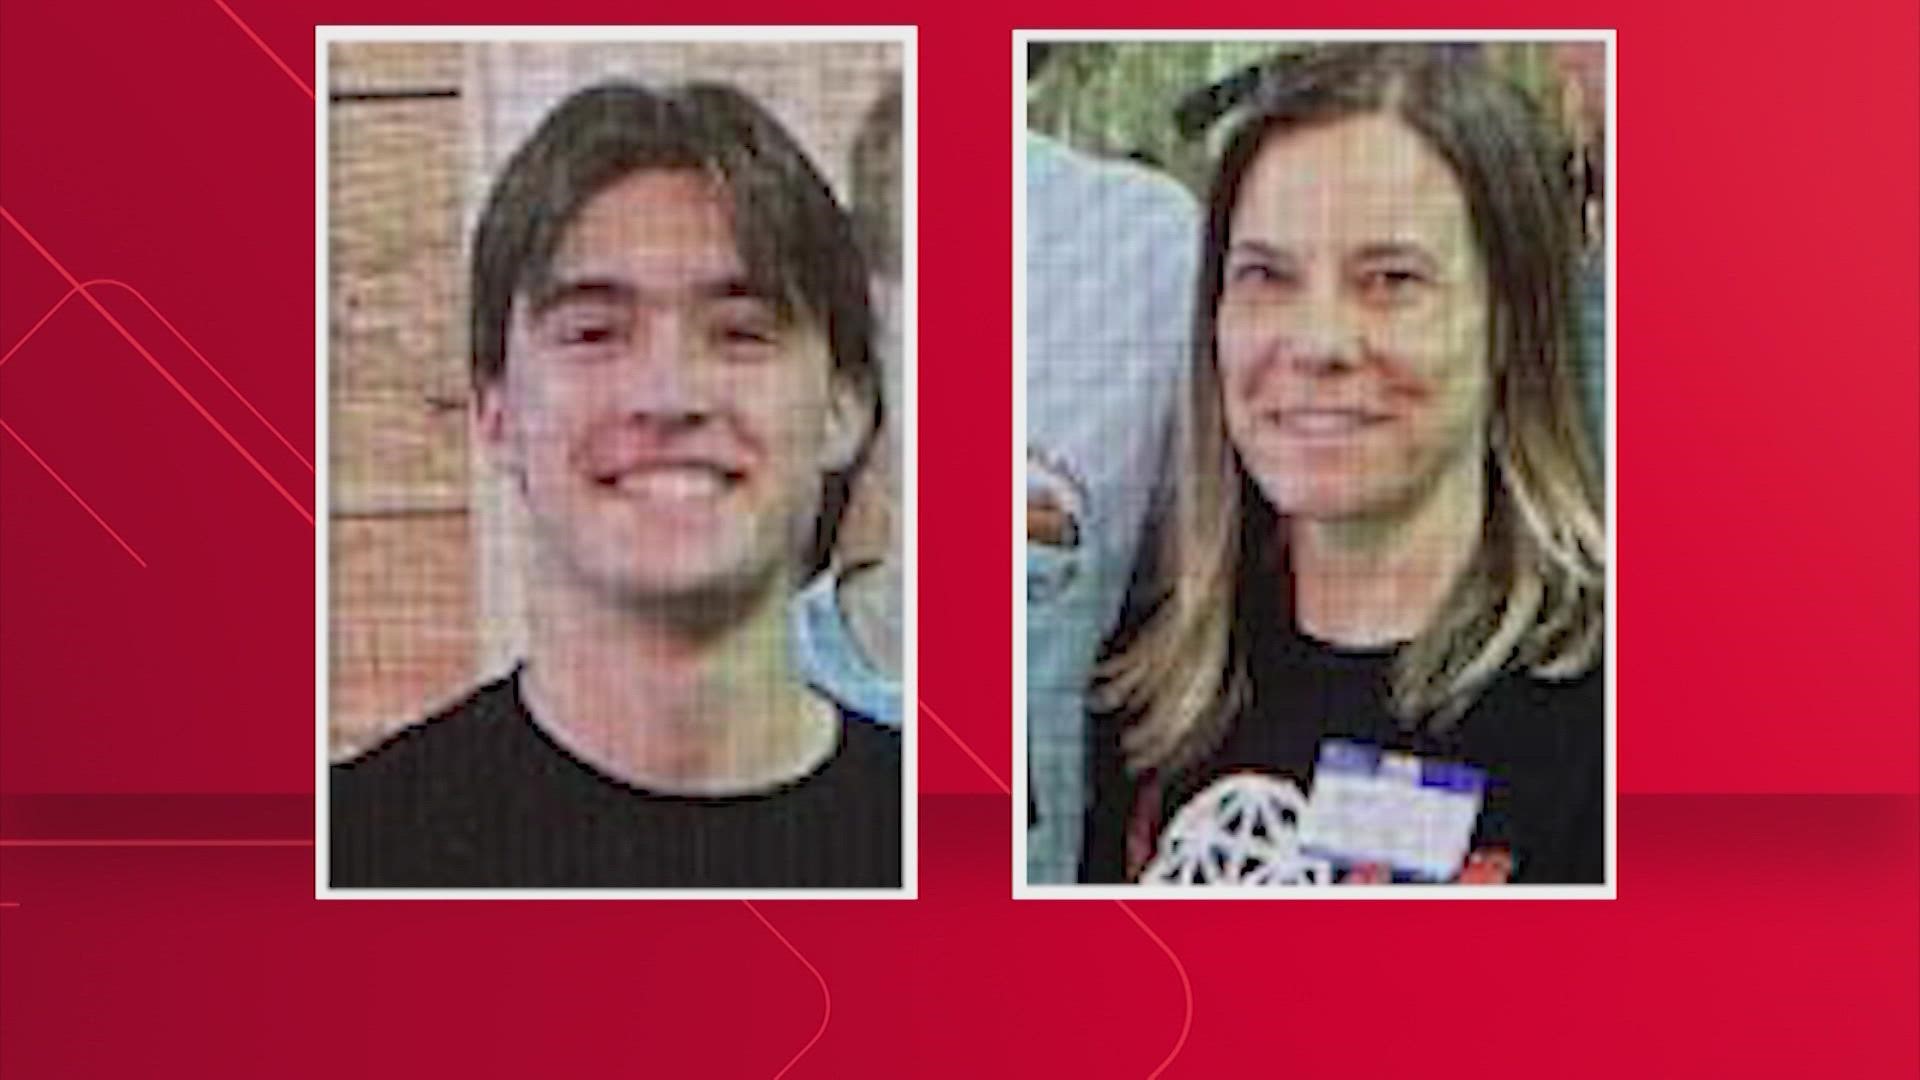 Officials say Tyler, 17, and Michelle Roenz, 49, were last seen on Birch Arbor Court, which is in the Fall Creek neighborhood in Humble.